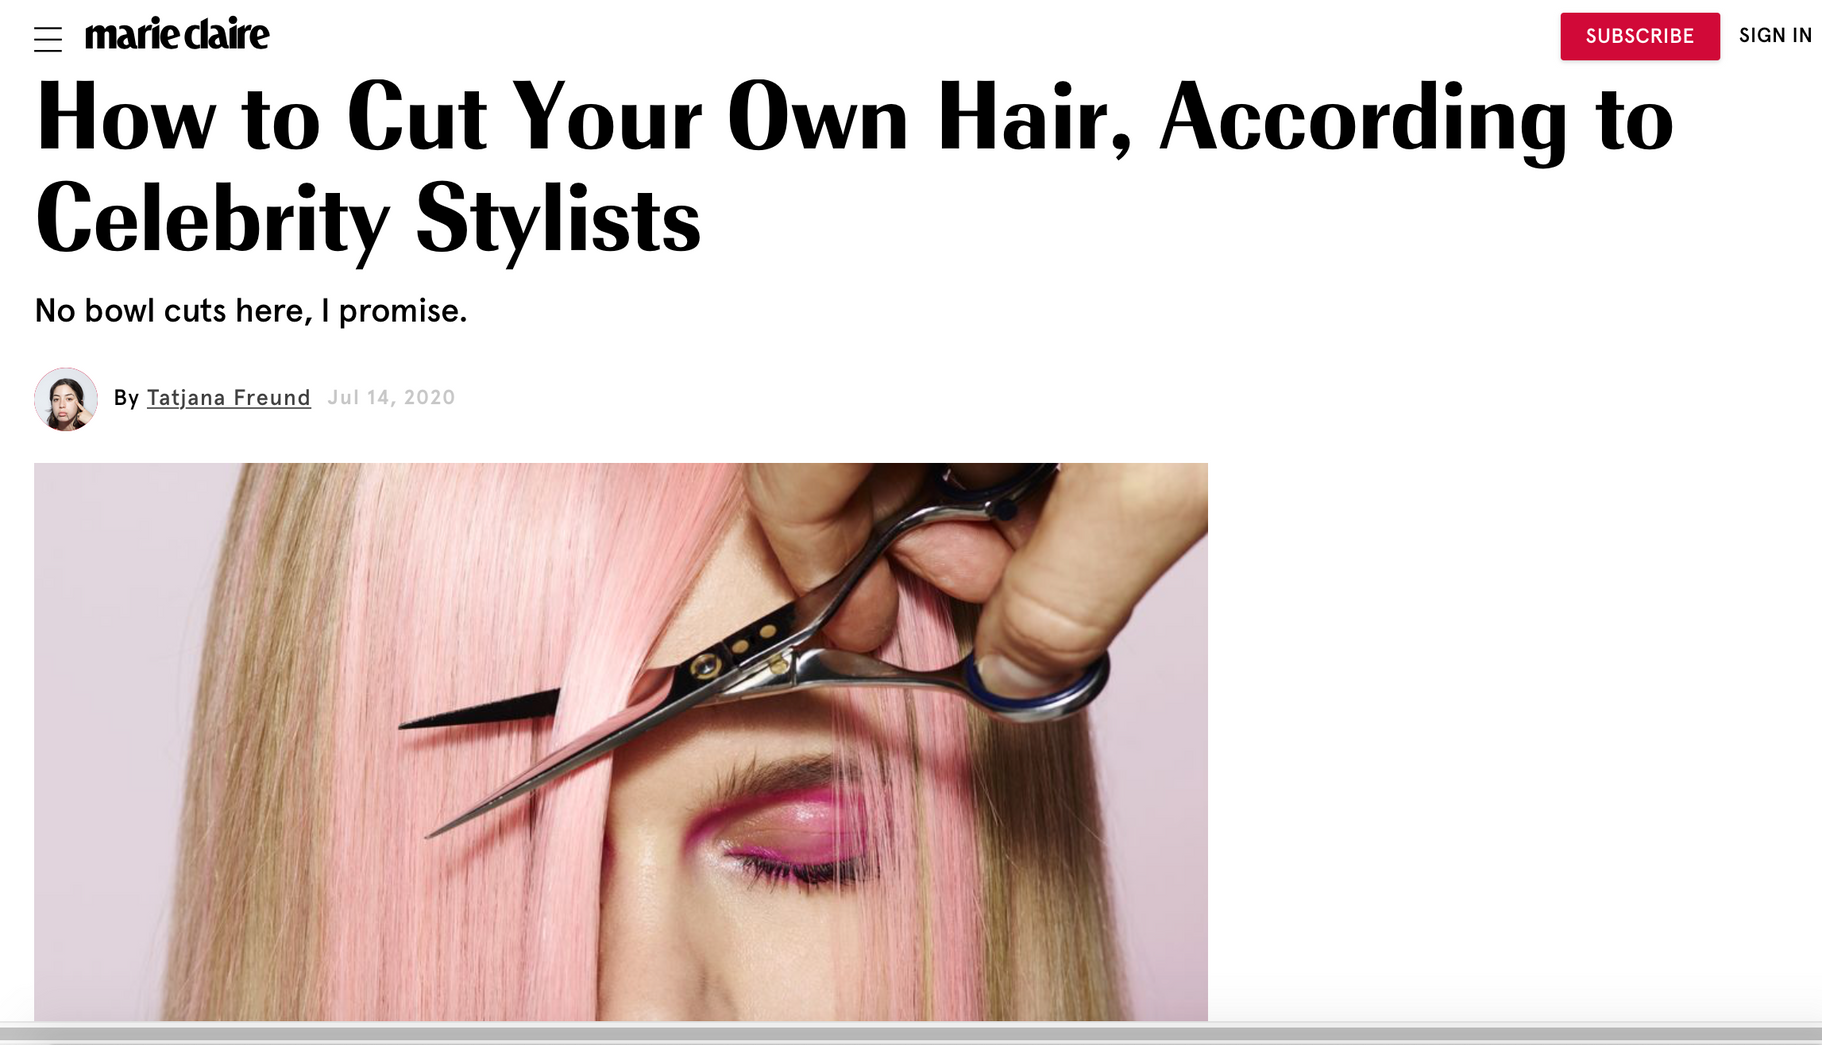 How to Cut Your Own Hair, According to Celebrity Stylists